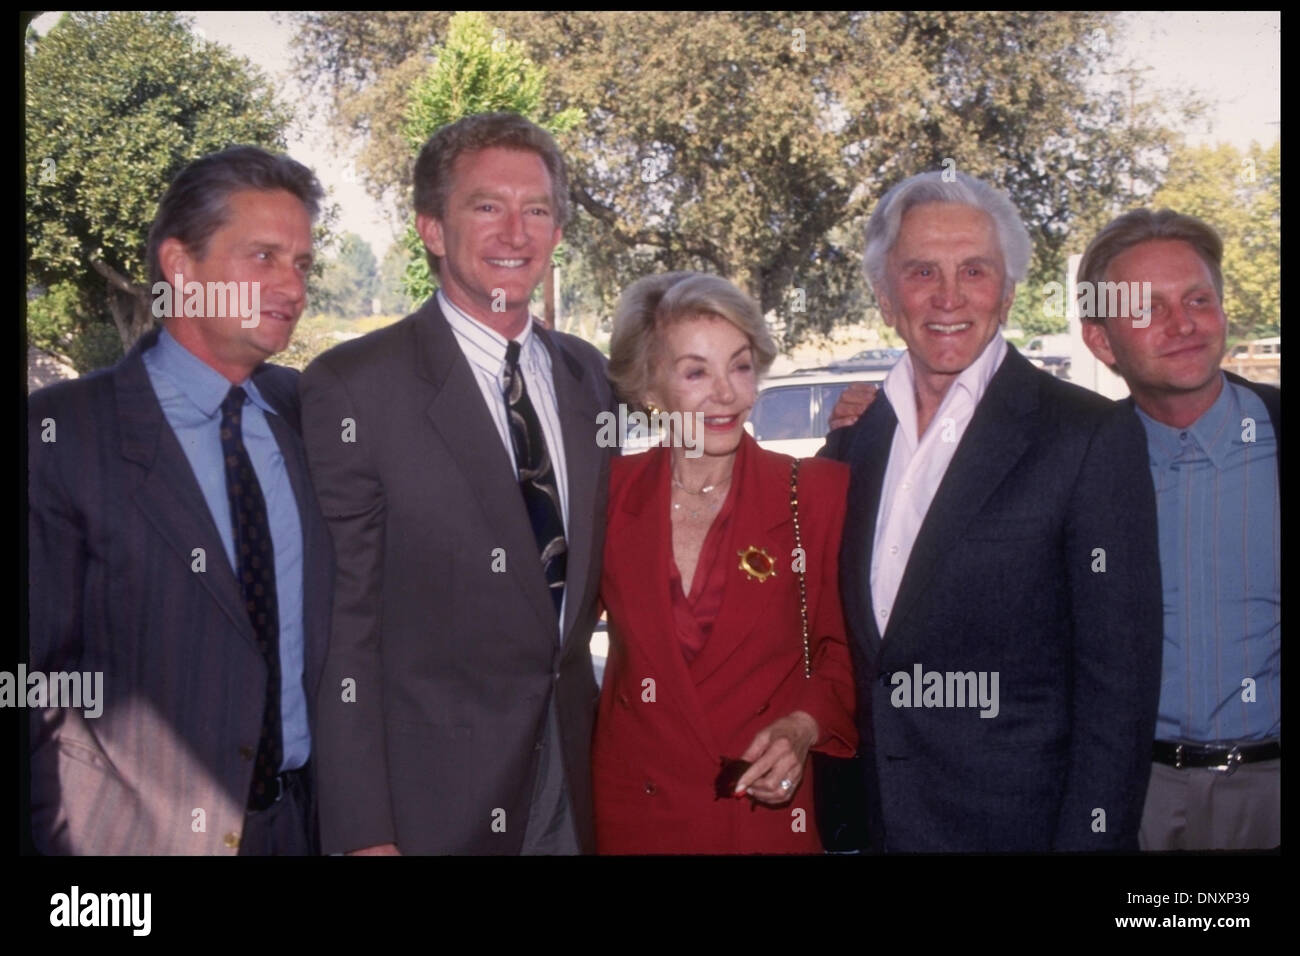 Hollywood, CA, USA;  KIRK, PETER, MICHAEL, ERIC and ANNE DOUGLAS are shown together in a photo taken on an unknown date.  Mandatory Credit: Kathy Hutchins/ZUMA Press. (©) Kathy Hutchins Stock Photo